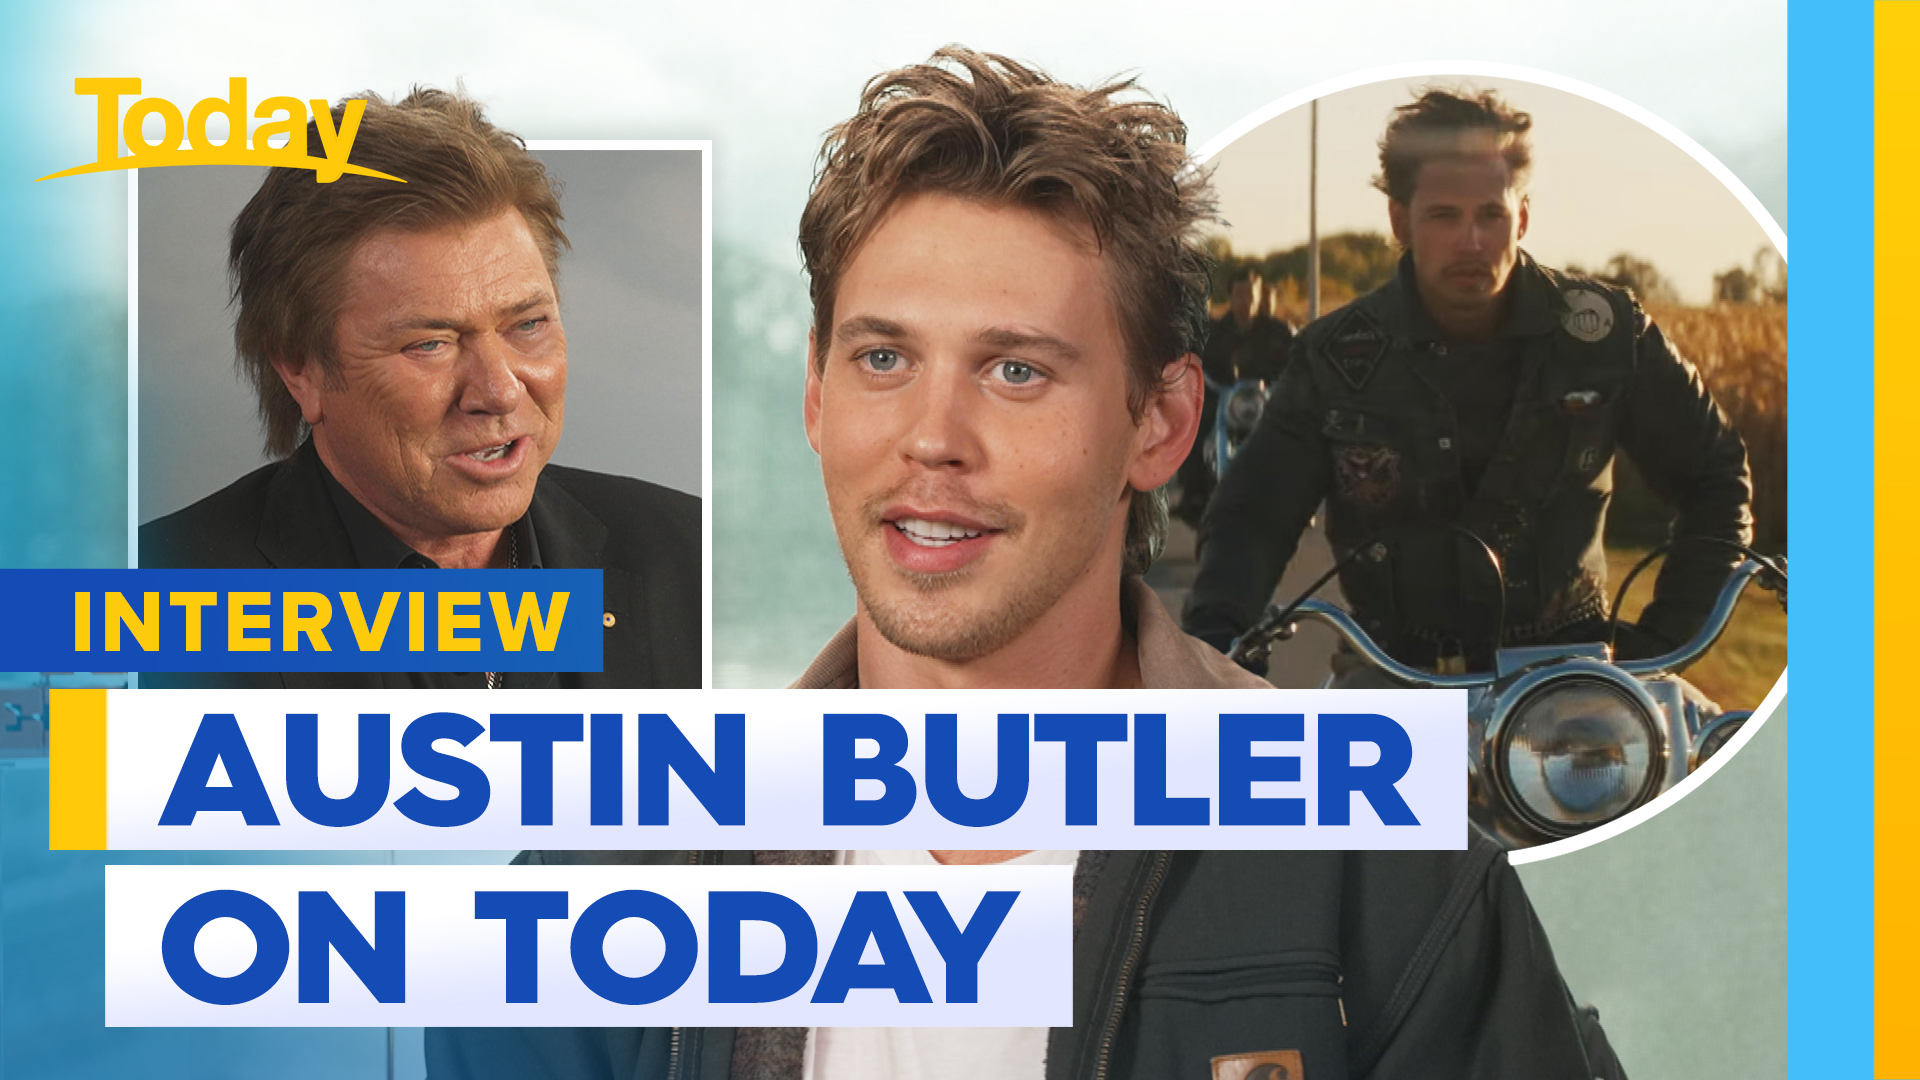 Austin Butler catches up with Today